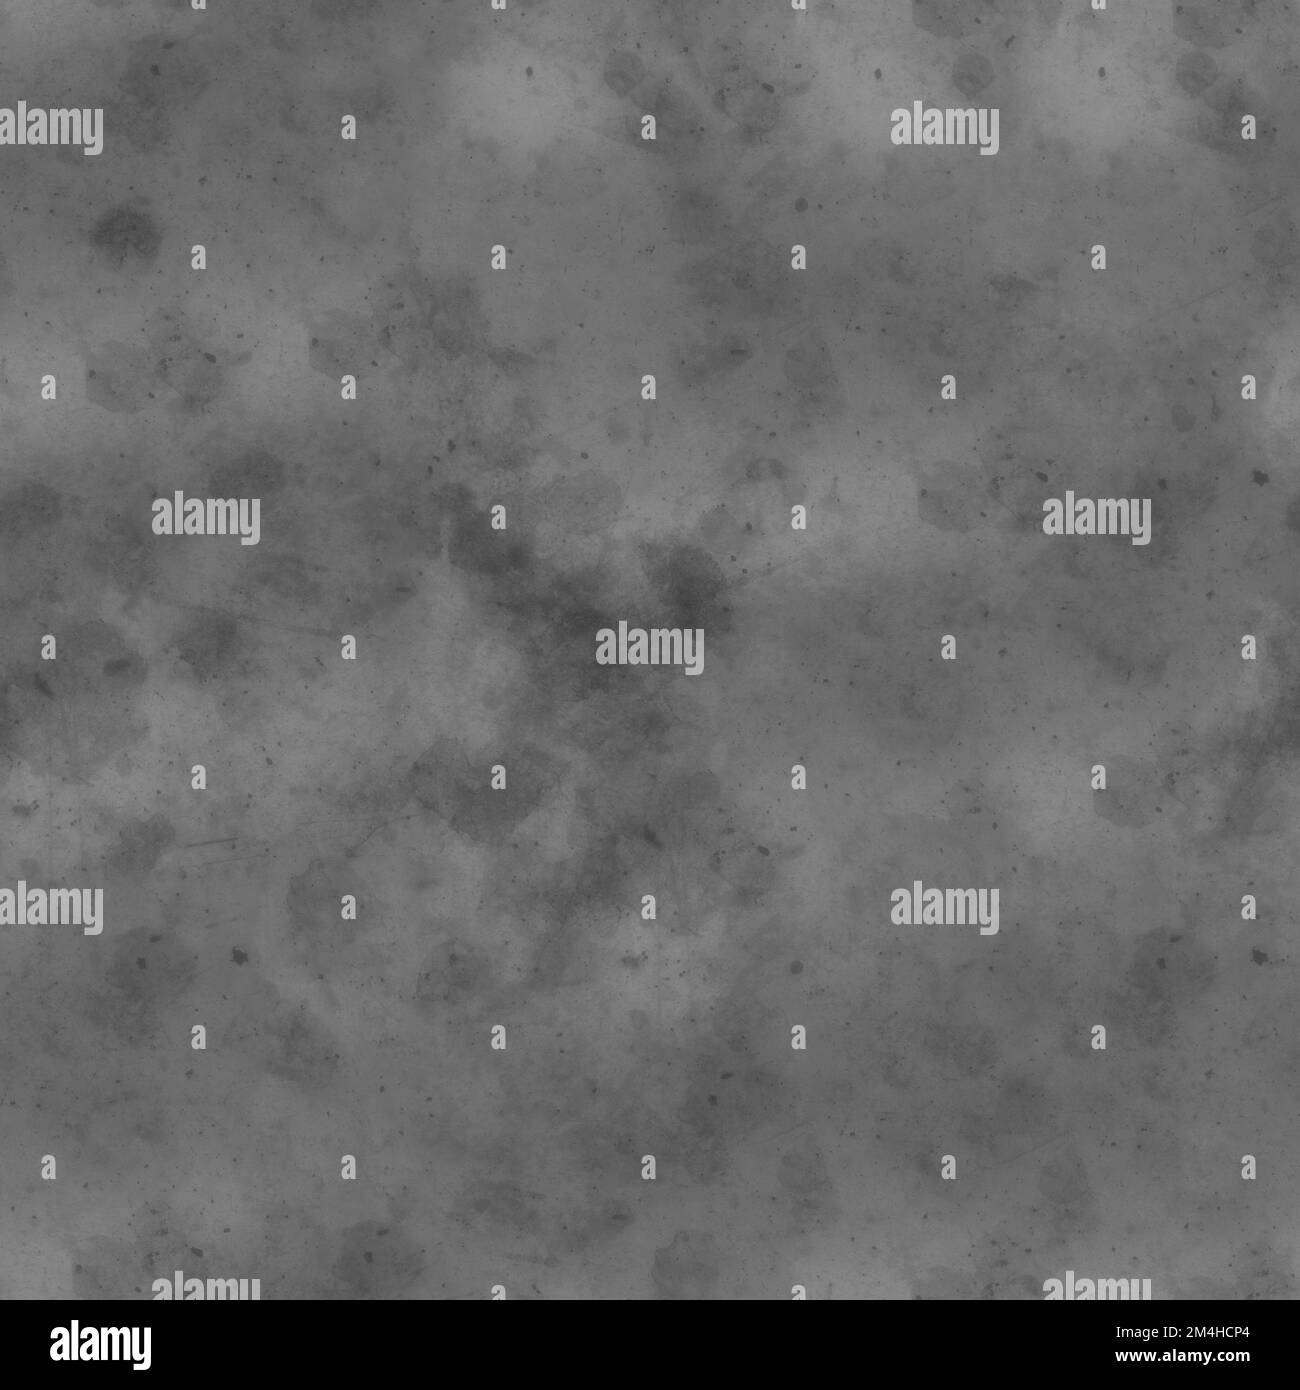 Bump map texture old metal, height texture mapping Stock Photo